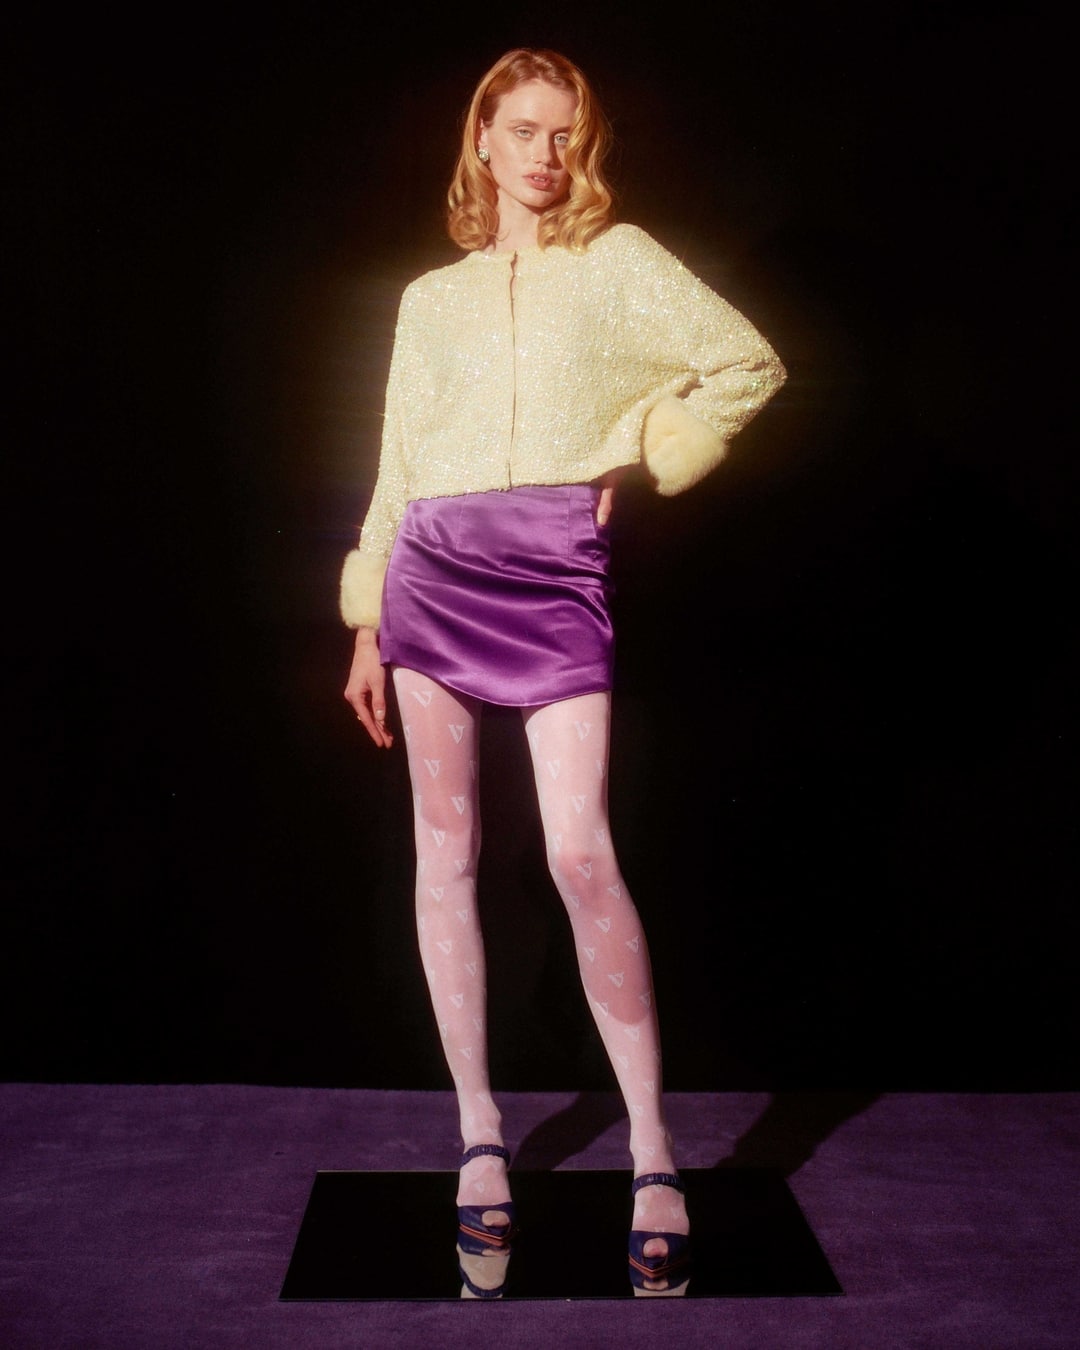 model wearing tights and standing